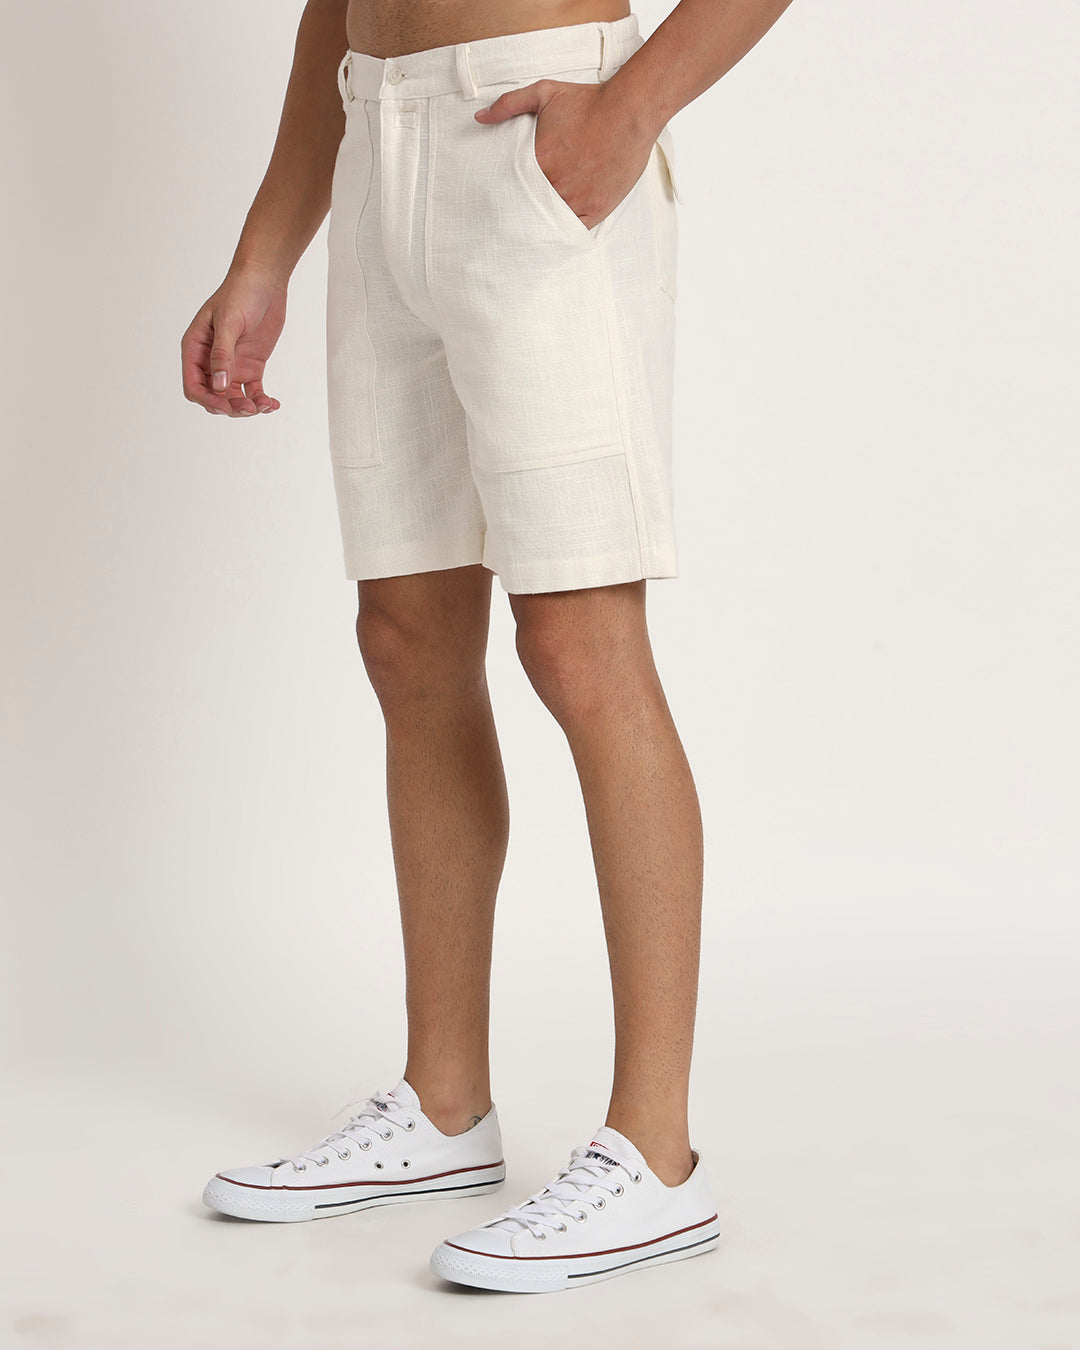 Combo : Patch Pocket Playtime White & Olive Green Men's Shorts